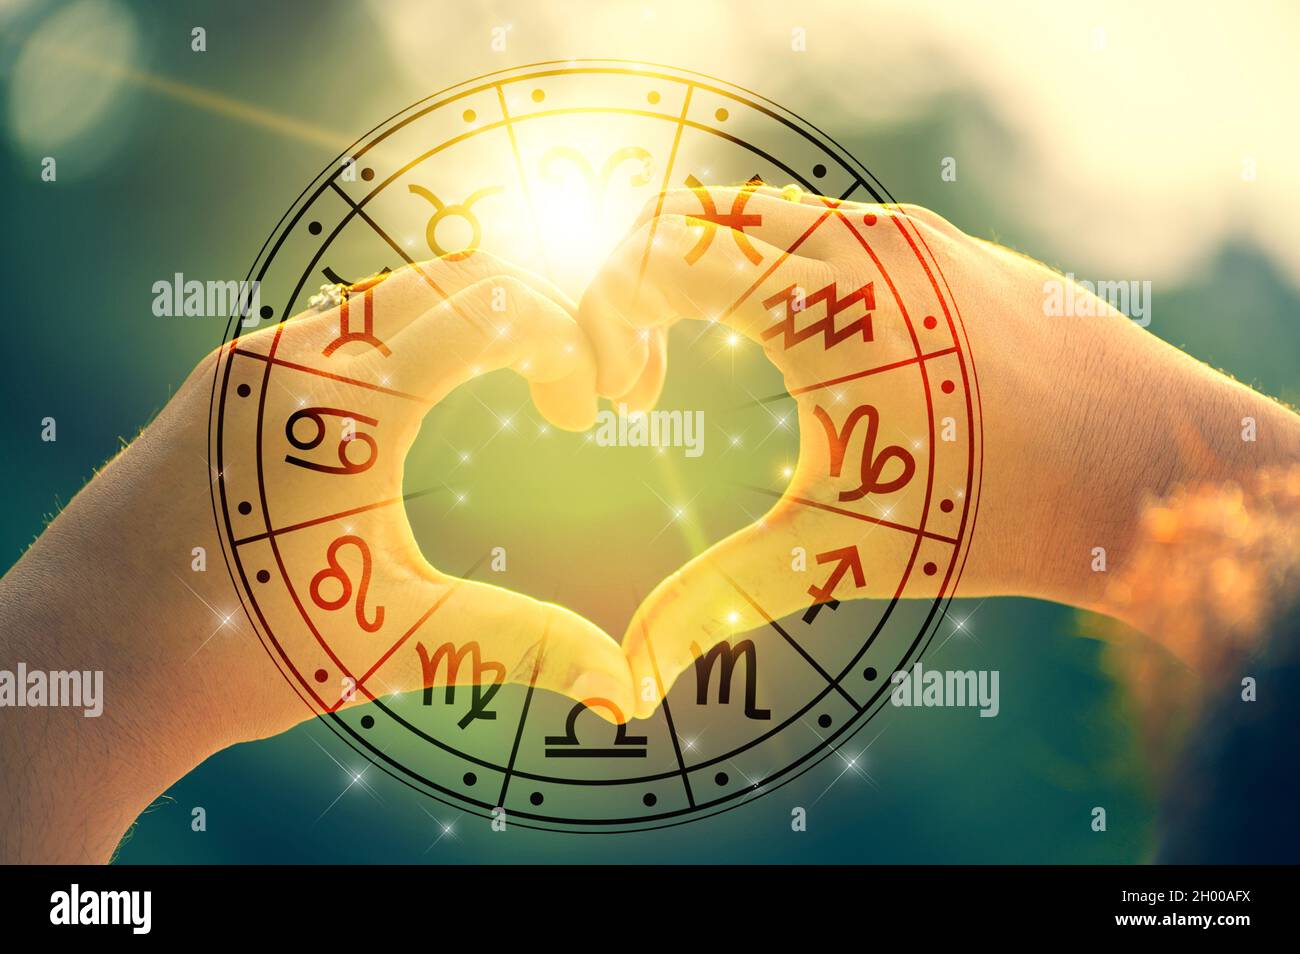 The hands of women and men are the heart shape with the sun light passing through the hands have astrological symbols Stock Photo